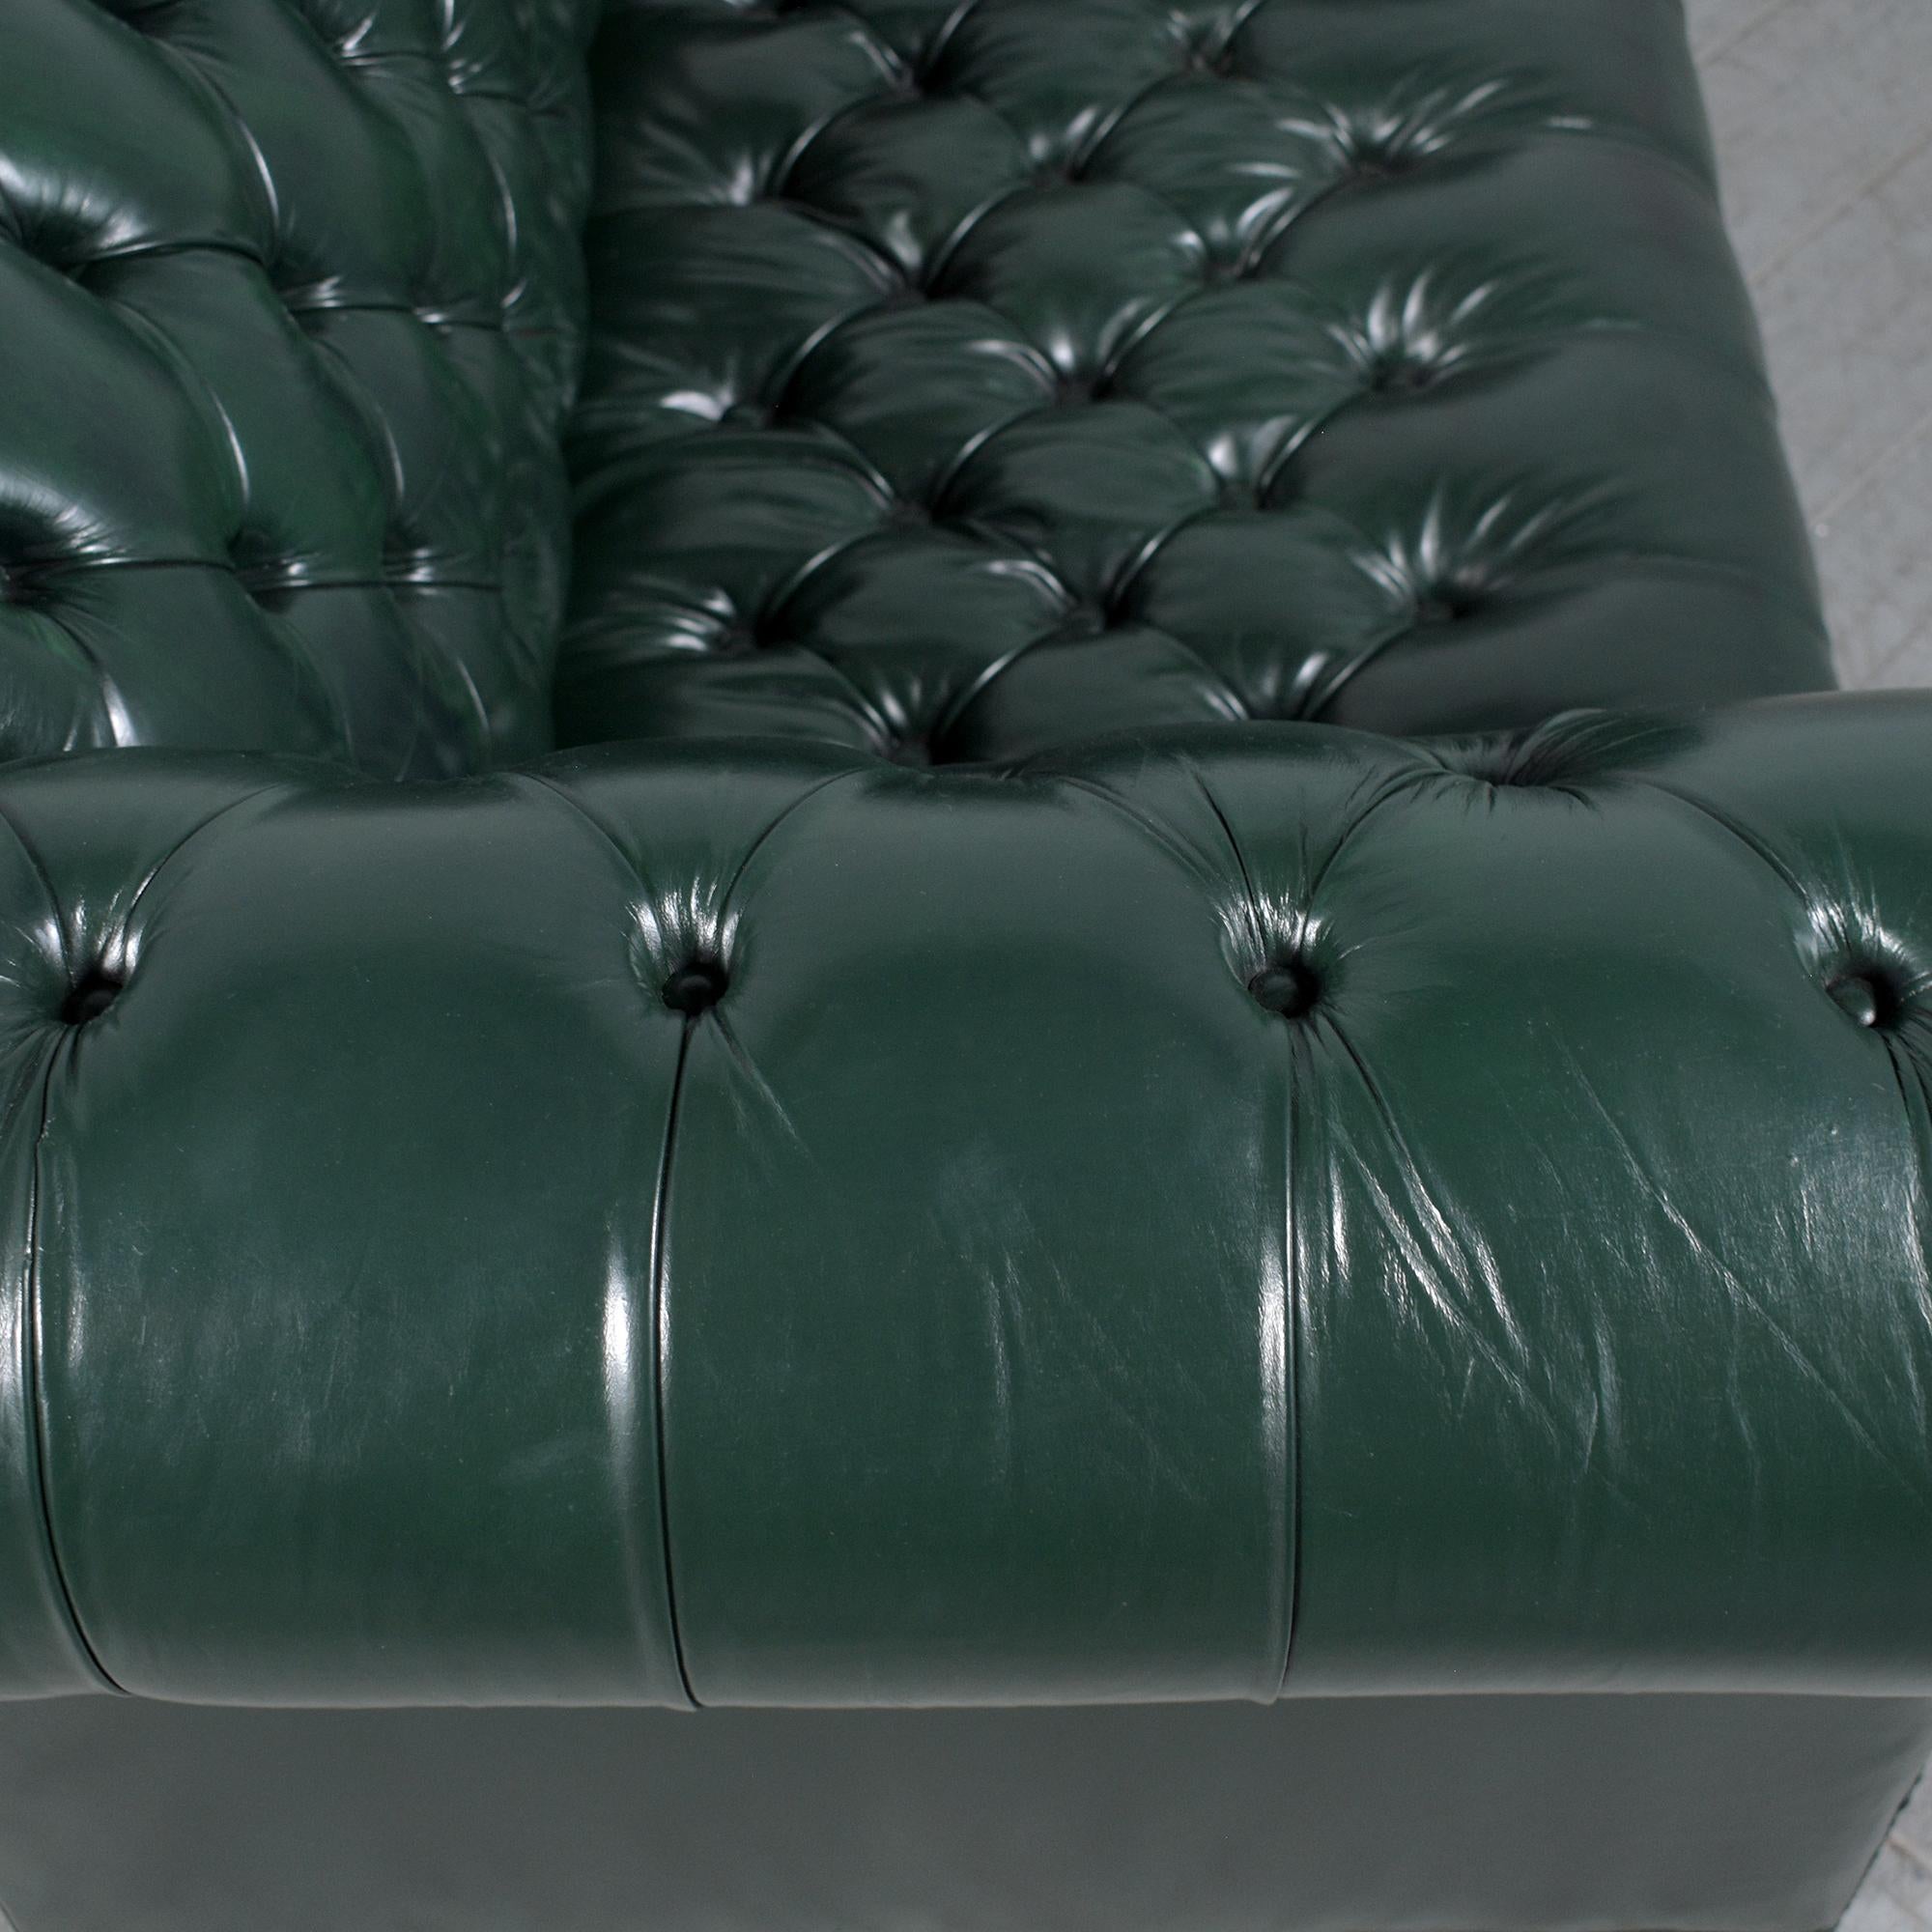 1970s Vintage Chesterfield Sofa: Emerald Green Leather with Elegant Carved Legs 7